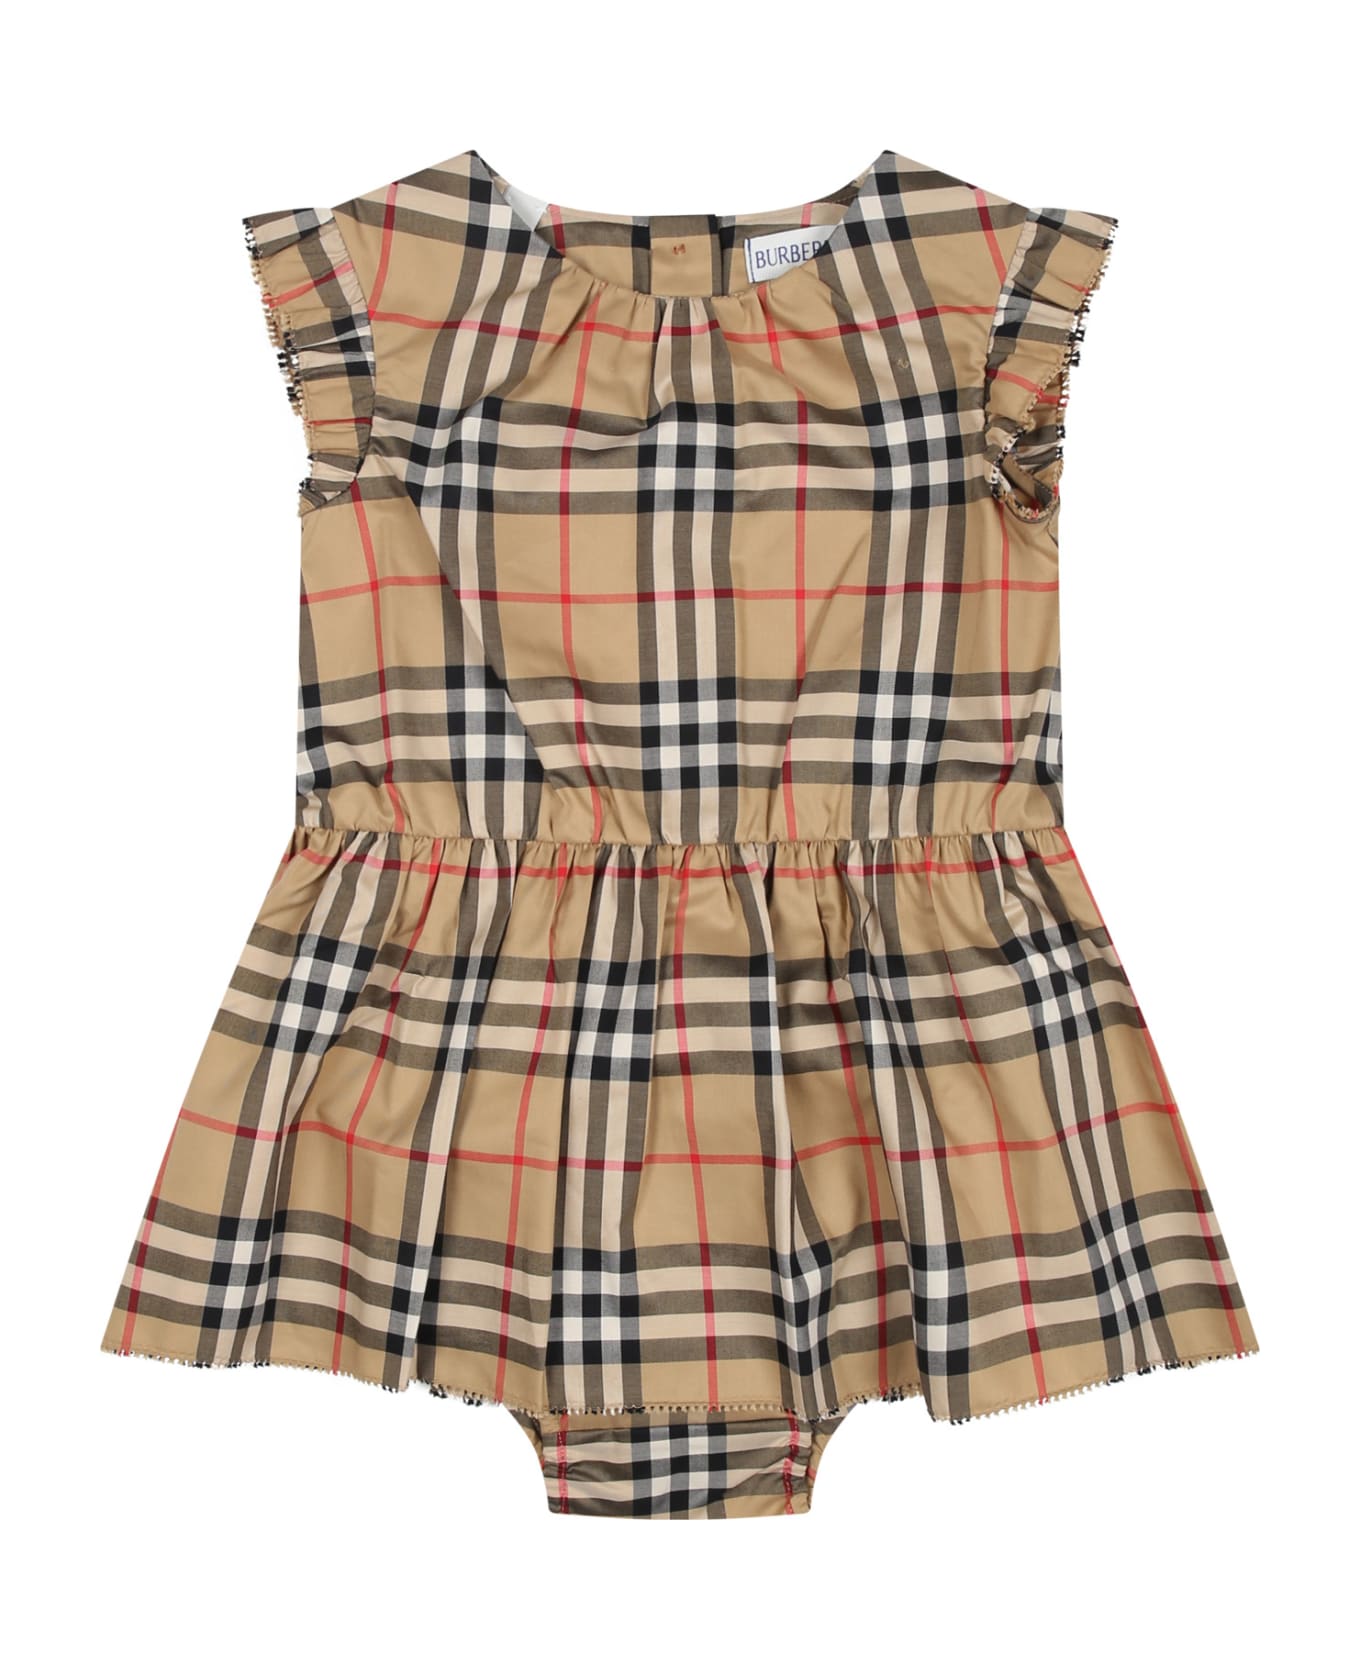 Burberry Beige Dress For Baby Girl With Iconic Vintage Check - Archive Beige Ip Check